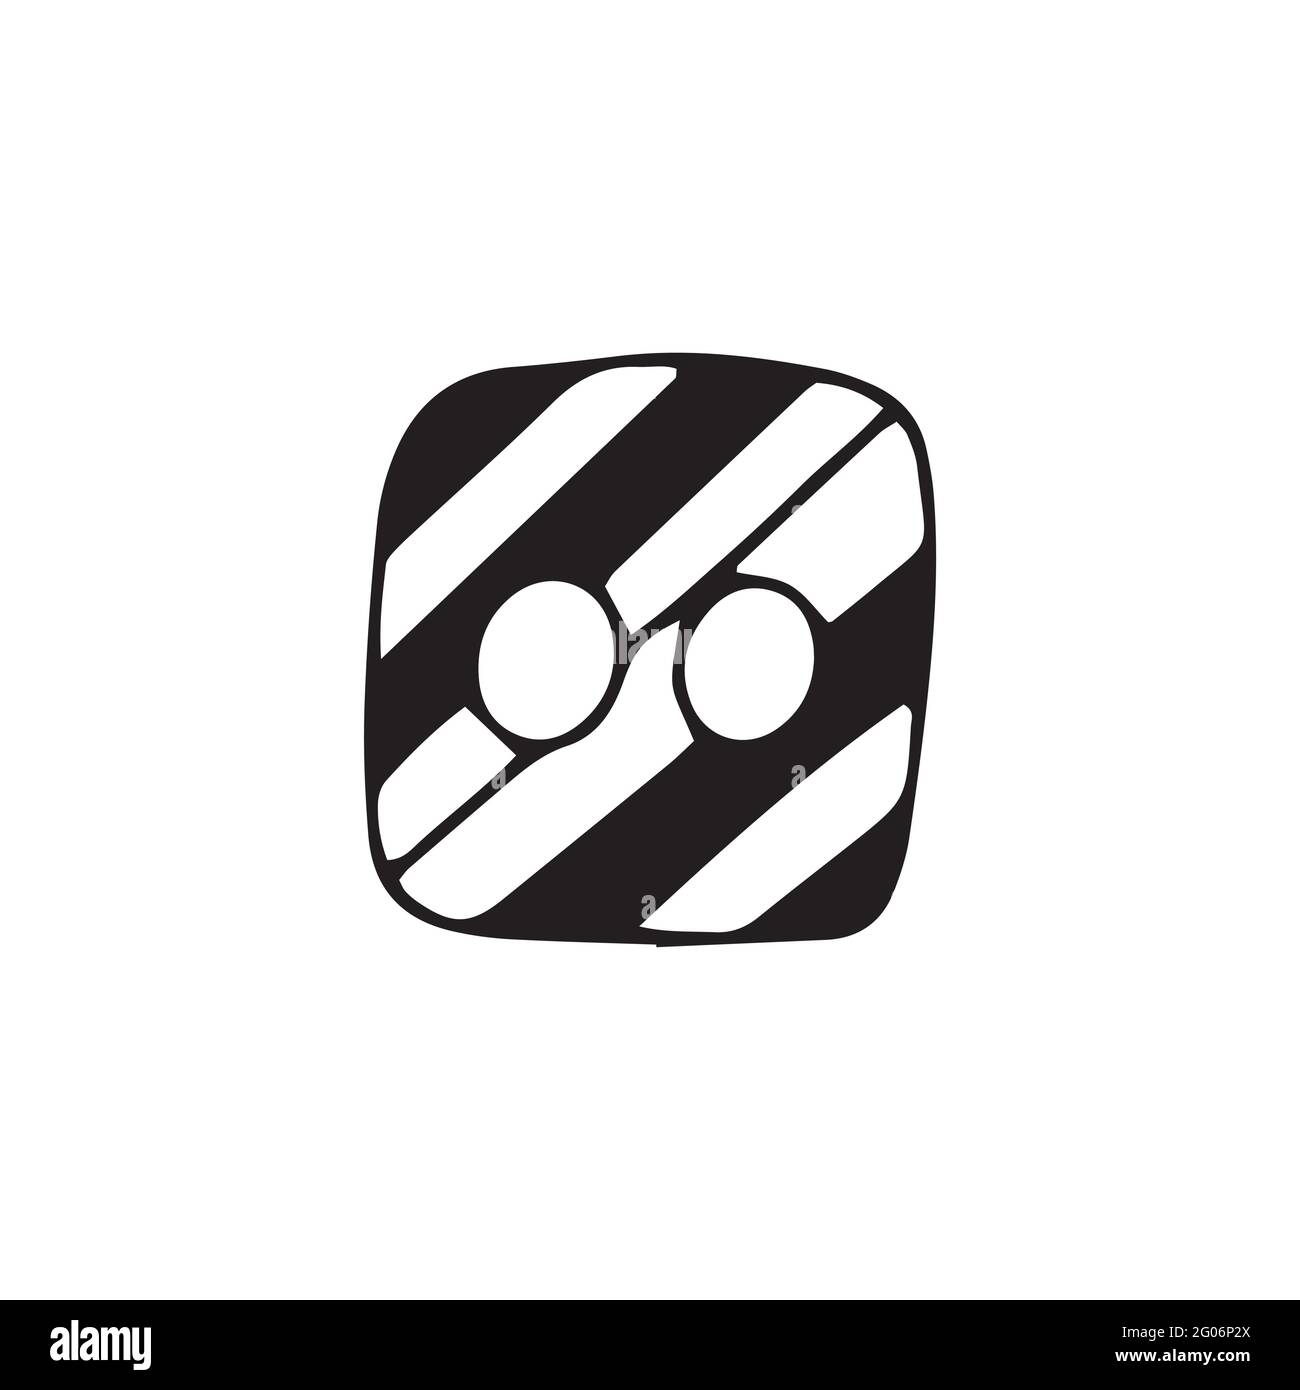 Striped Small Button Black And White Vector Illustration In Doodle Style Isolated Single